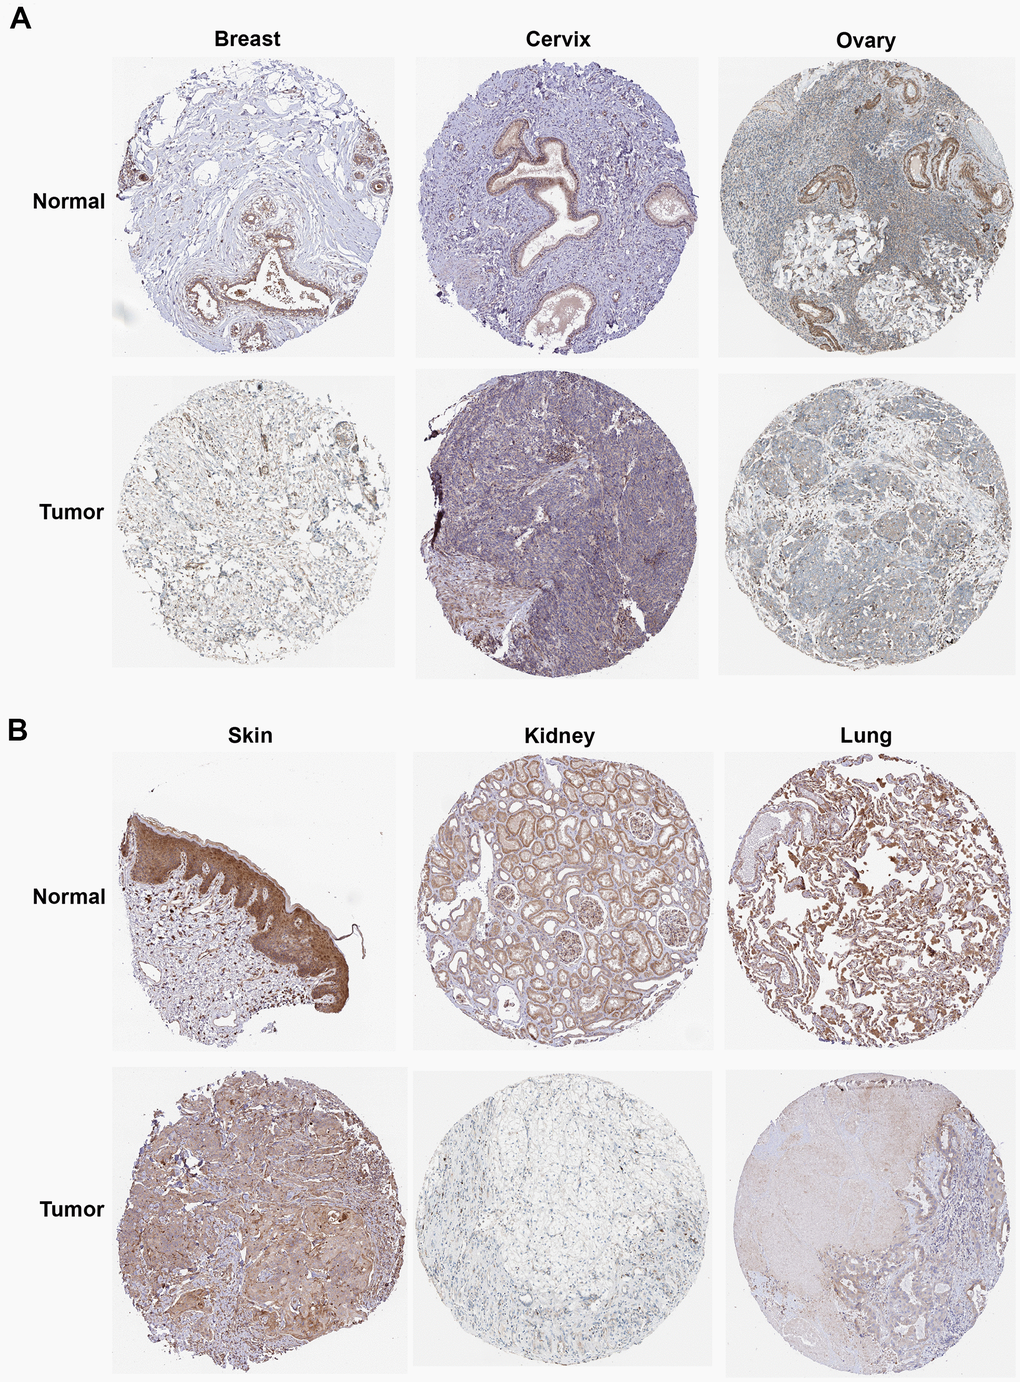 The protein expression of ROCK1 in pan-cancer. (A) The protein expression level of ROCK1 in women-specific cancers (Breast tumors, Cervical tumors, and Ovarian tumors versus normal tissues. (B) The protein expression level of ROCK1 in Skin tumors, Renal tumors, and Lung tumors versus normal tissues.